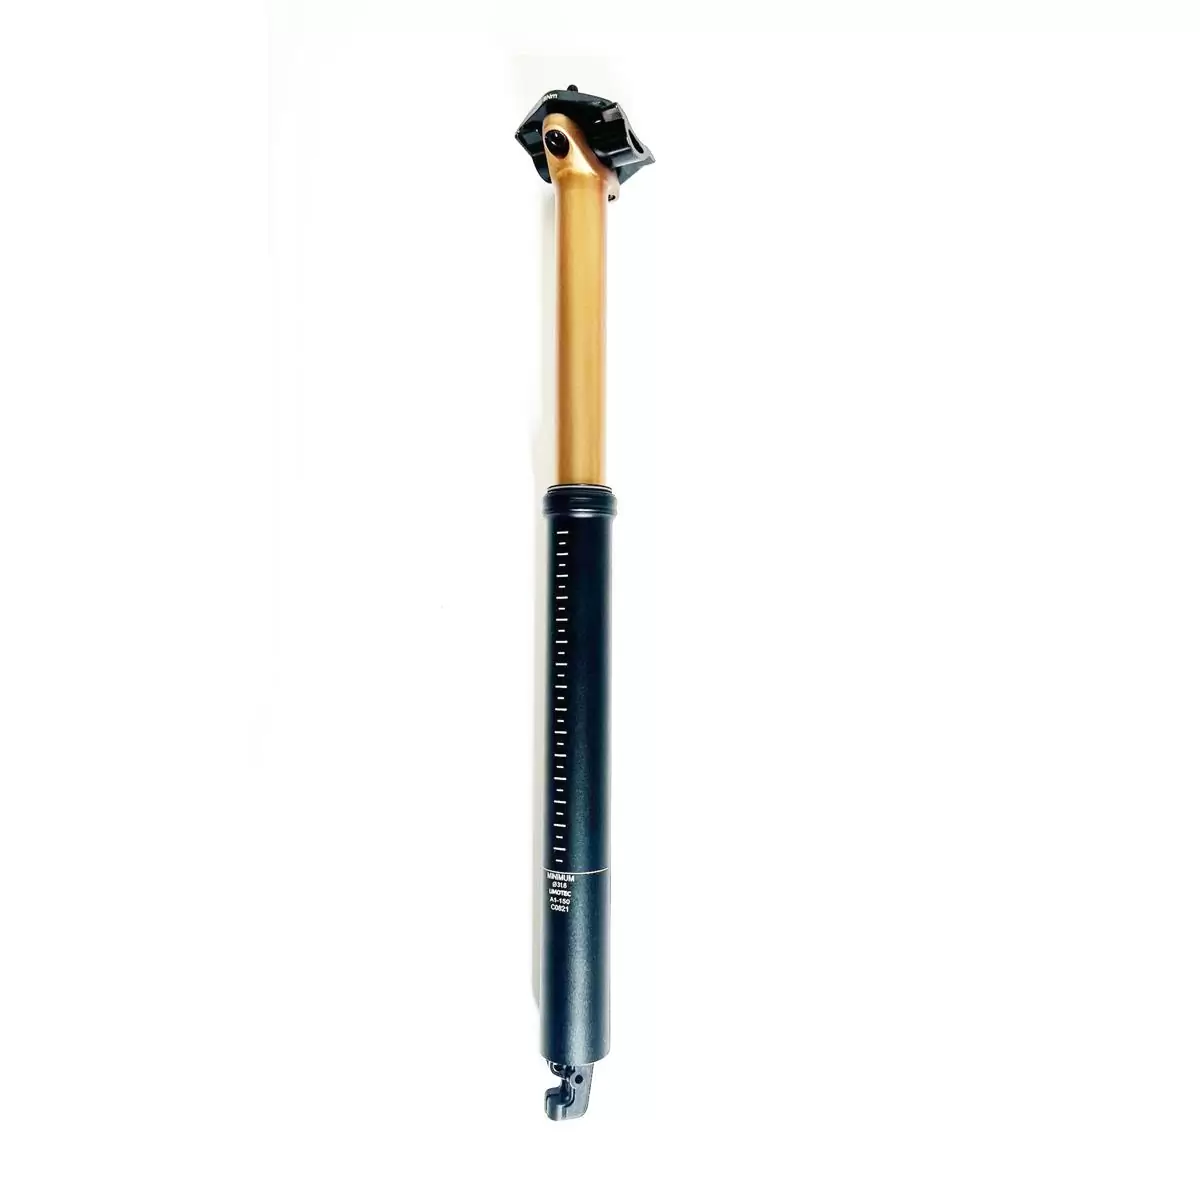 Dropper Seatpost A01 31.6mm 150mm Internal Cable Black Gold finish #2